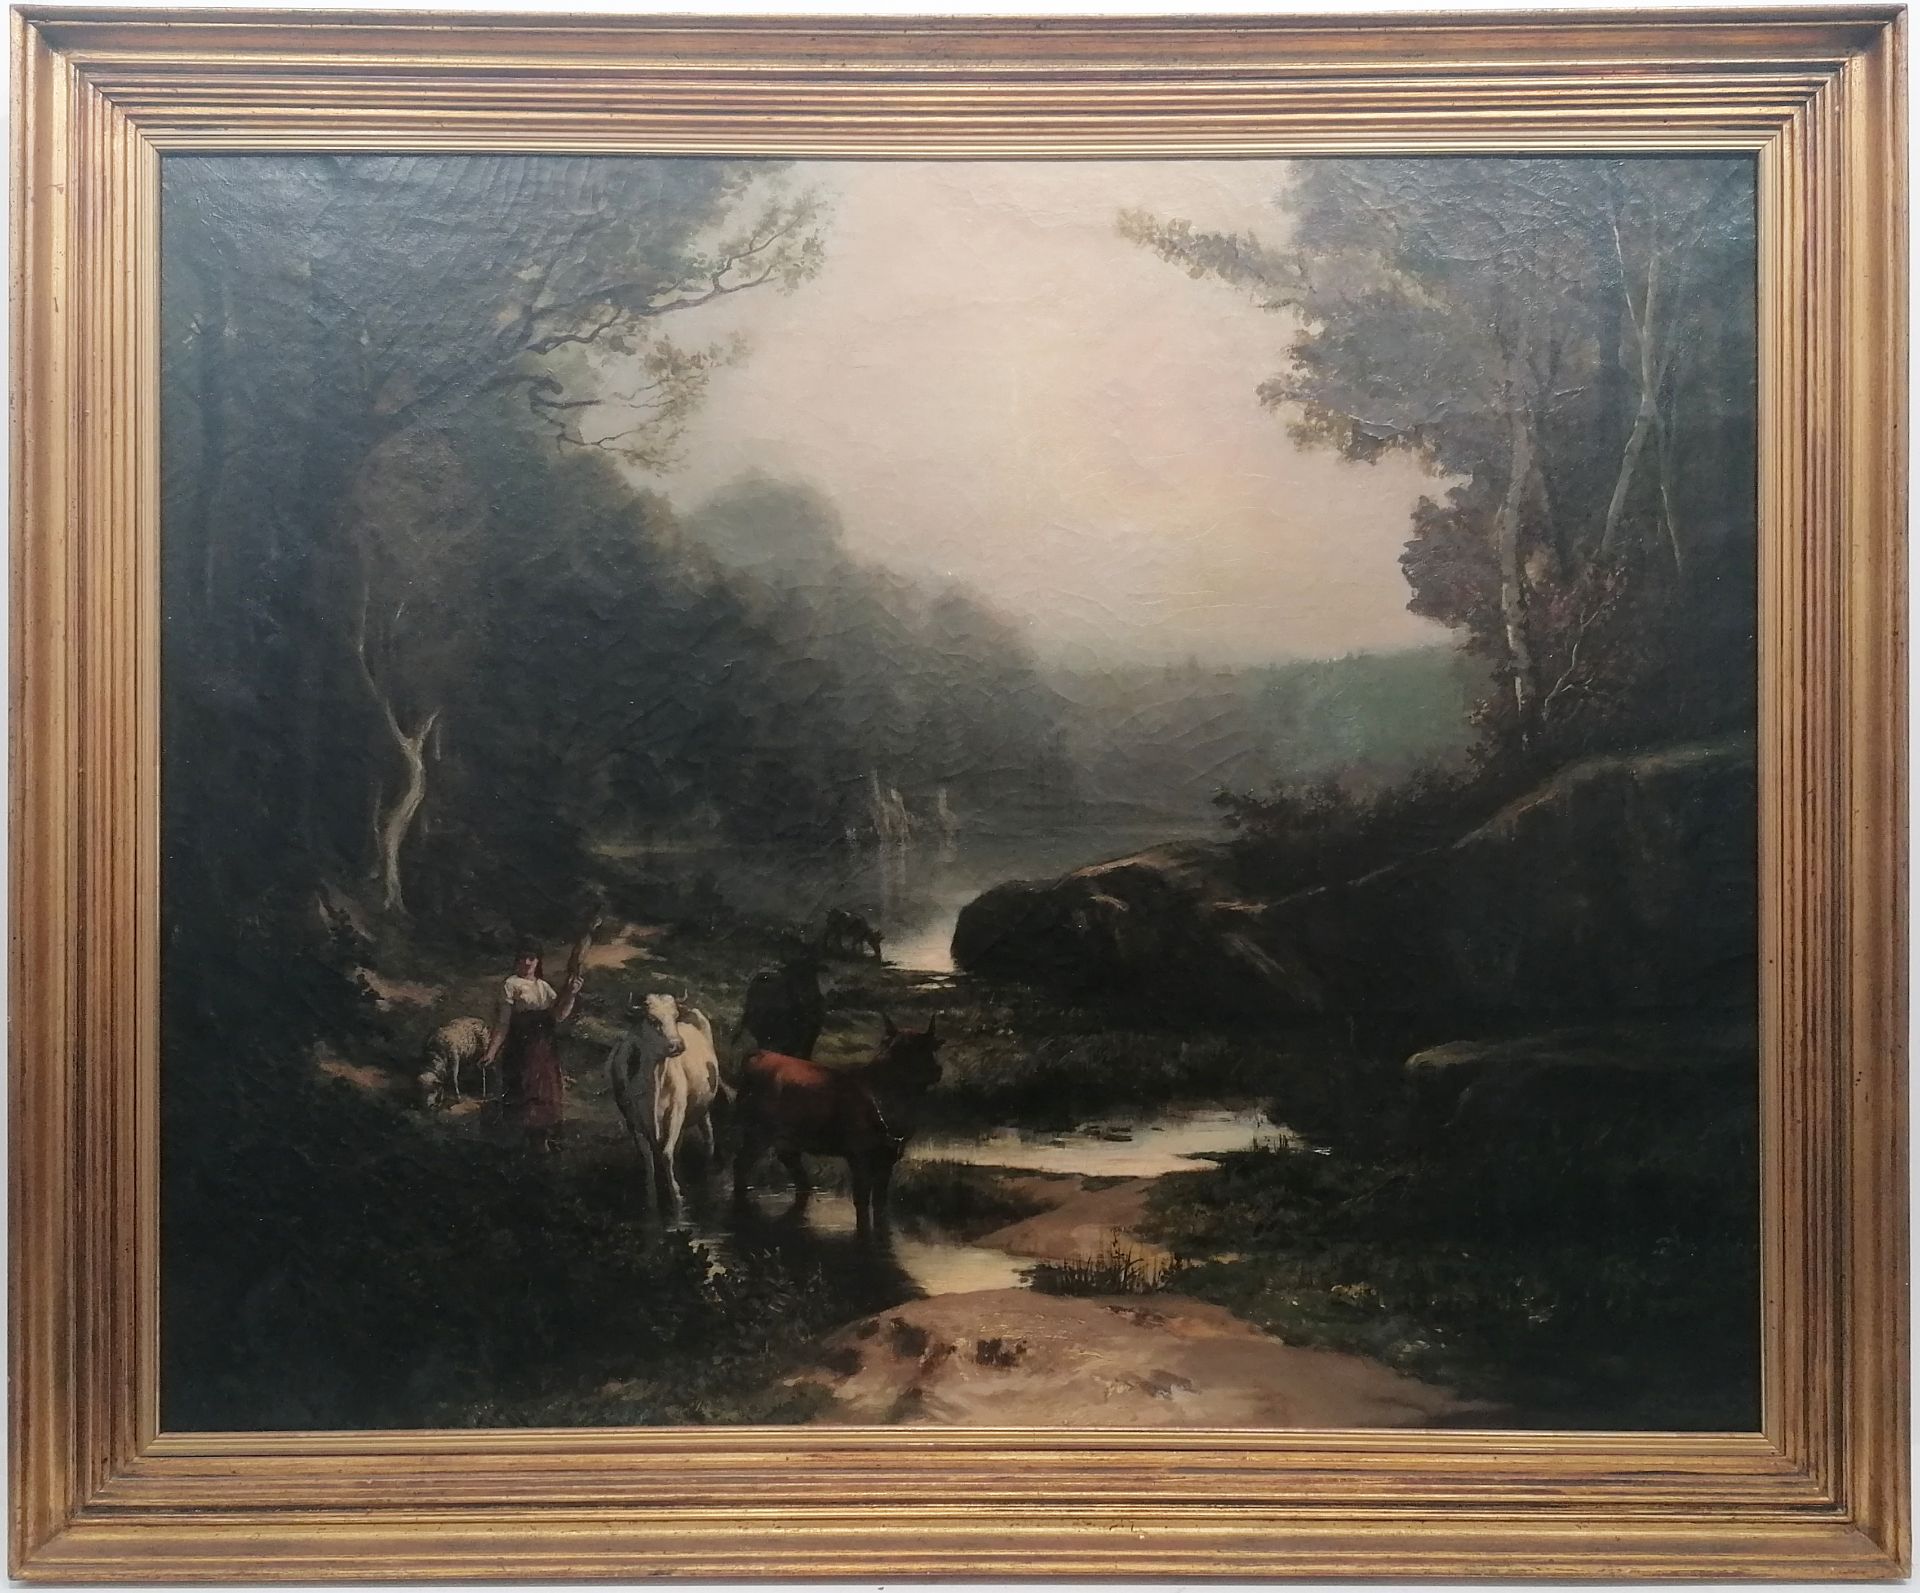 Théodore Levigne (1848-1912)Shepherdess by a lakeSigned lower rightOil on canvas80 x 100 cm.